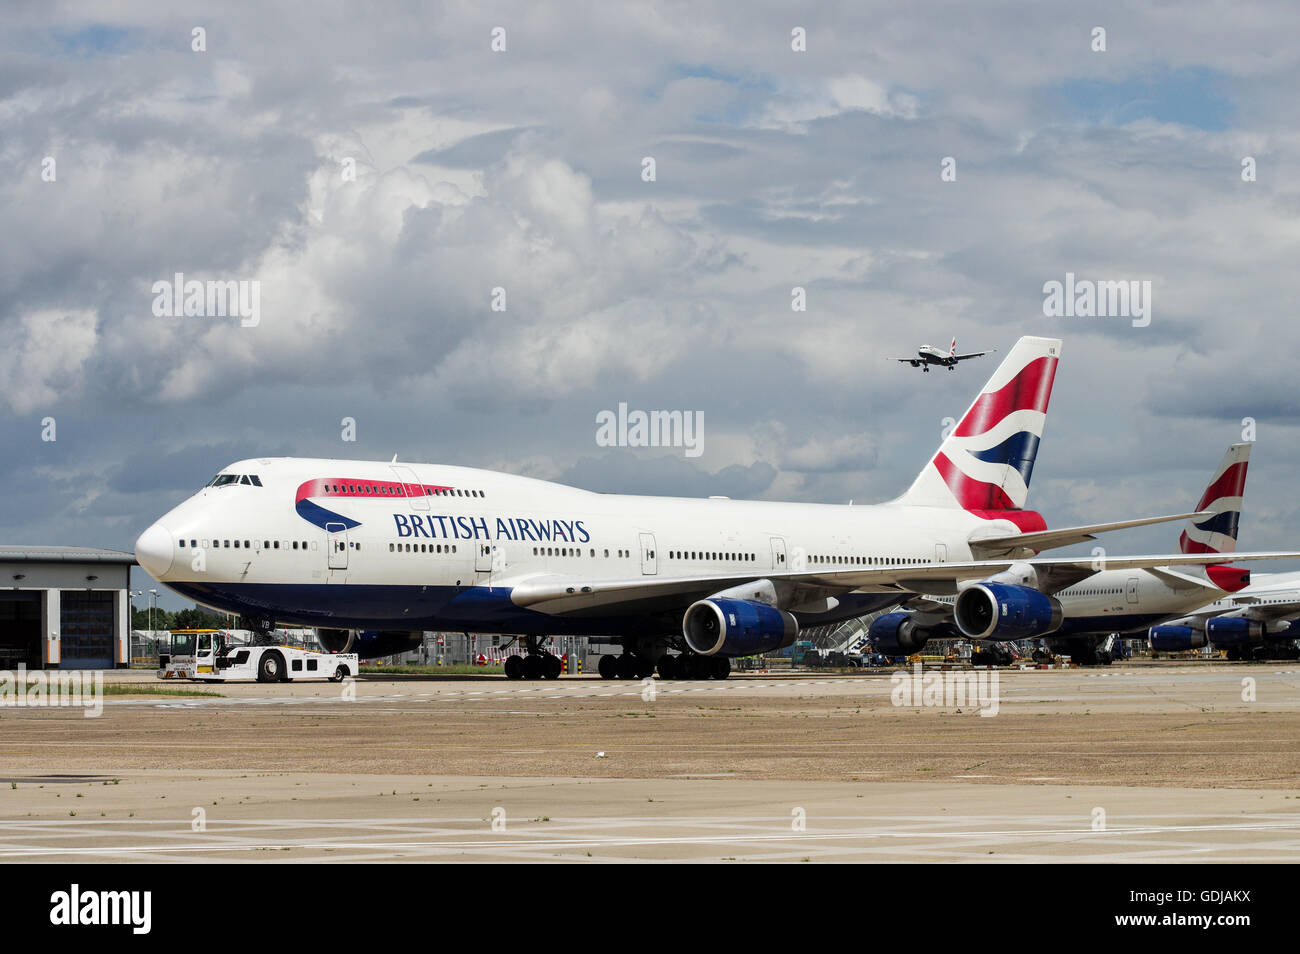 Row of British Airways airplanes with another aircraft approaching in the background at London Heathrow Airport Stock Photo